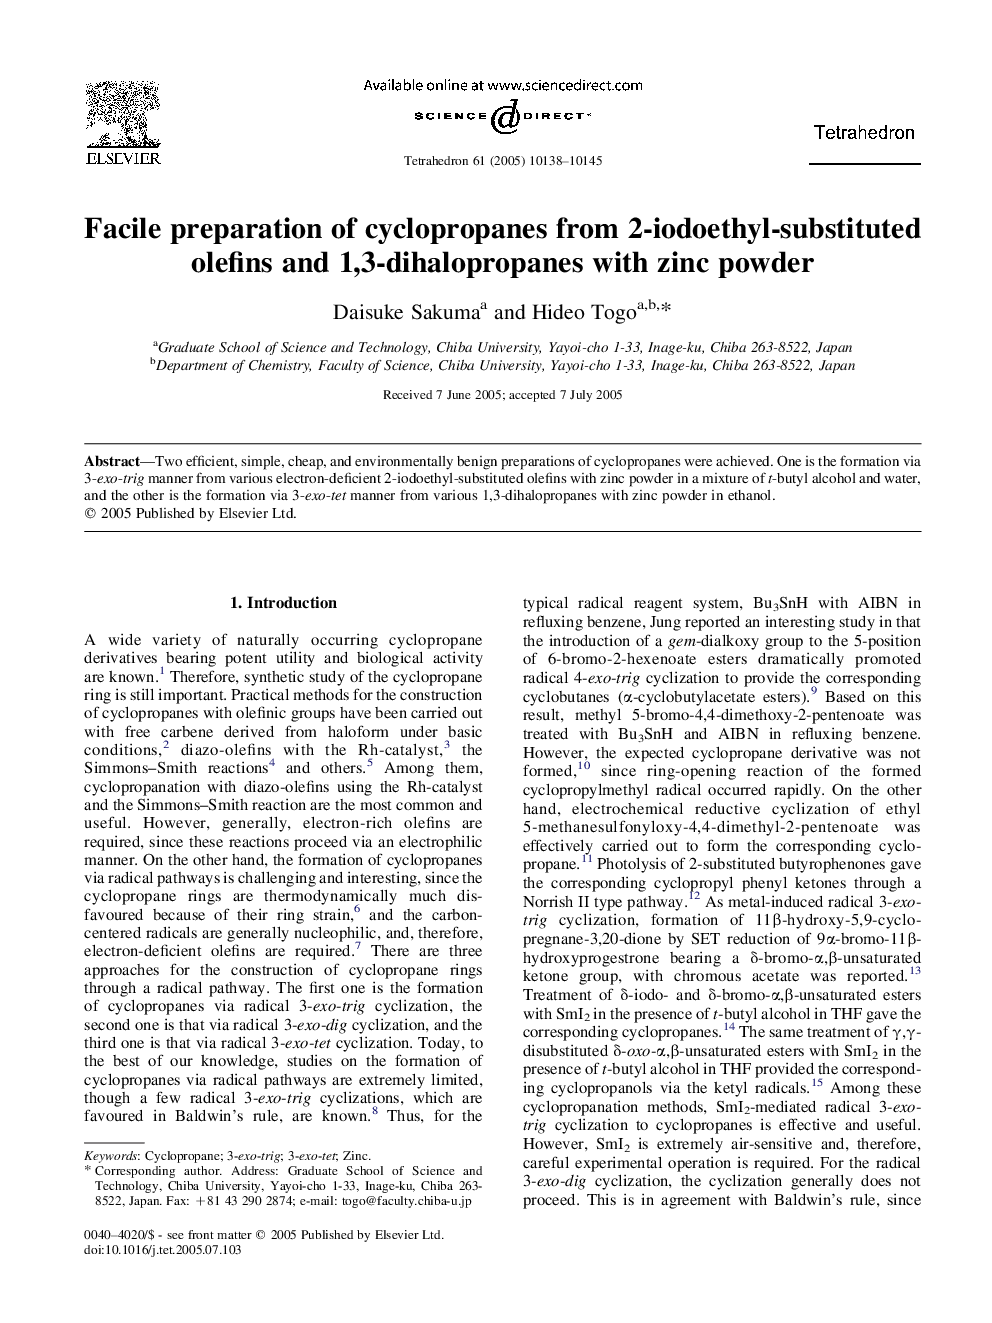 Facile preparation of cyclopropanes from 2-iodoethyl-substituted olefins and 1,3-dihalopropanes with zinc powder